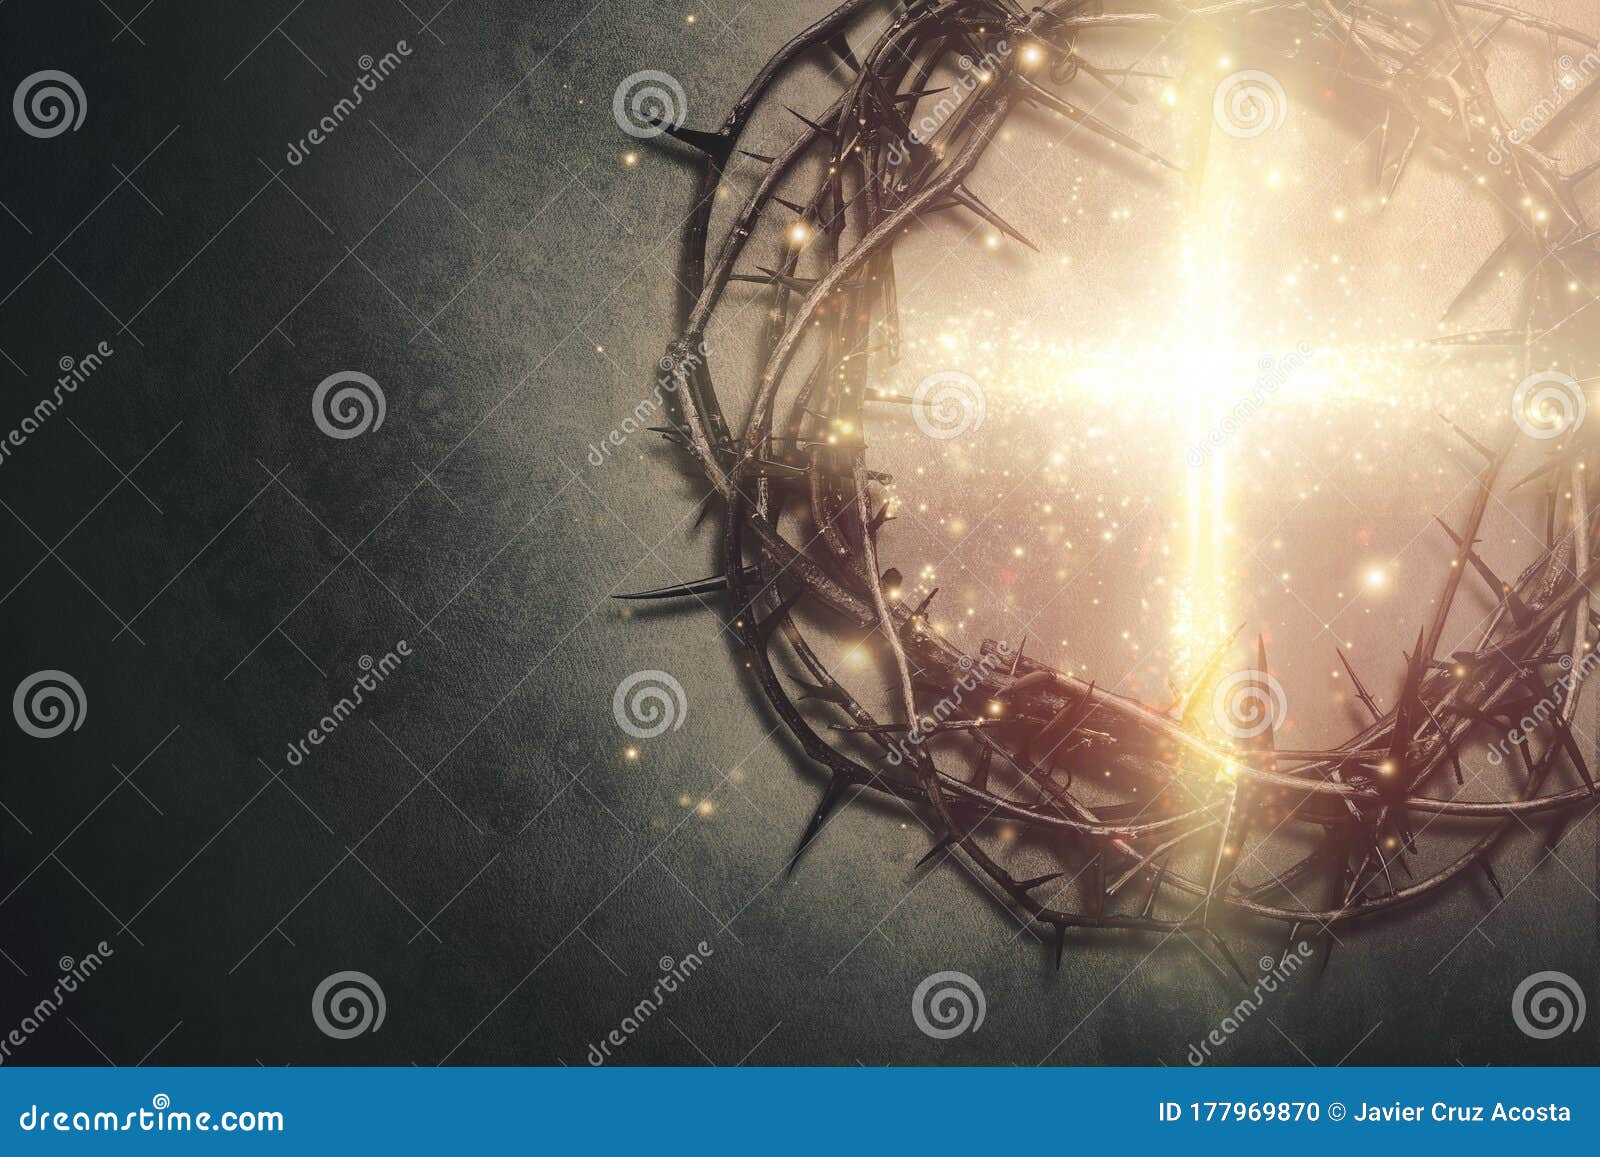 crown of  thorns with glowing cross